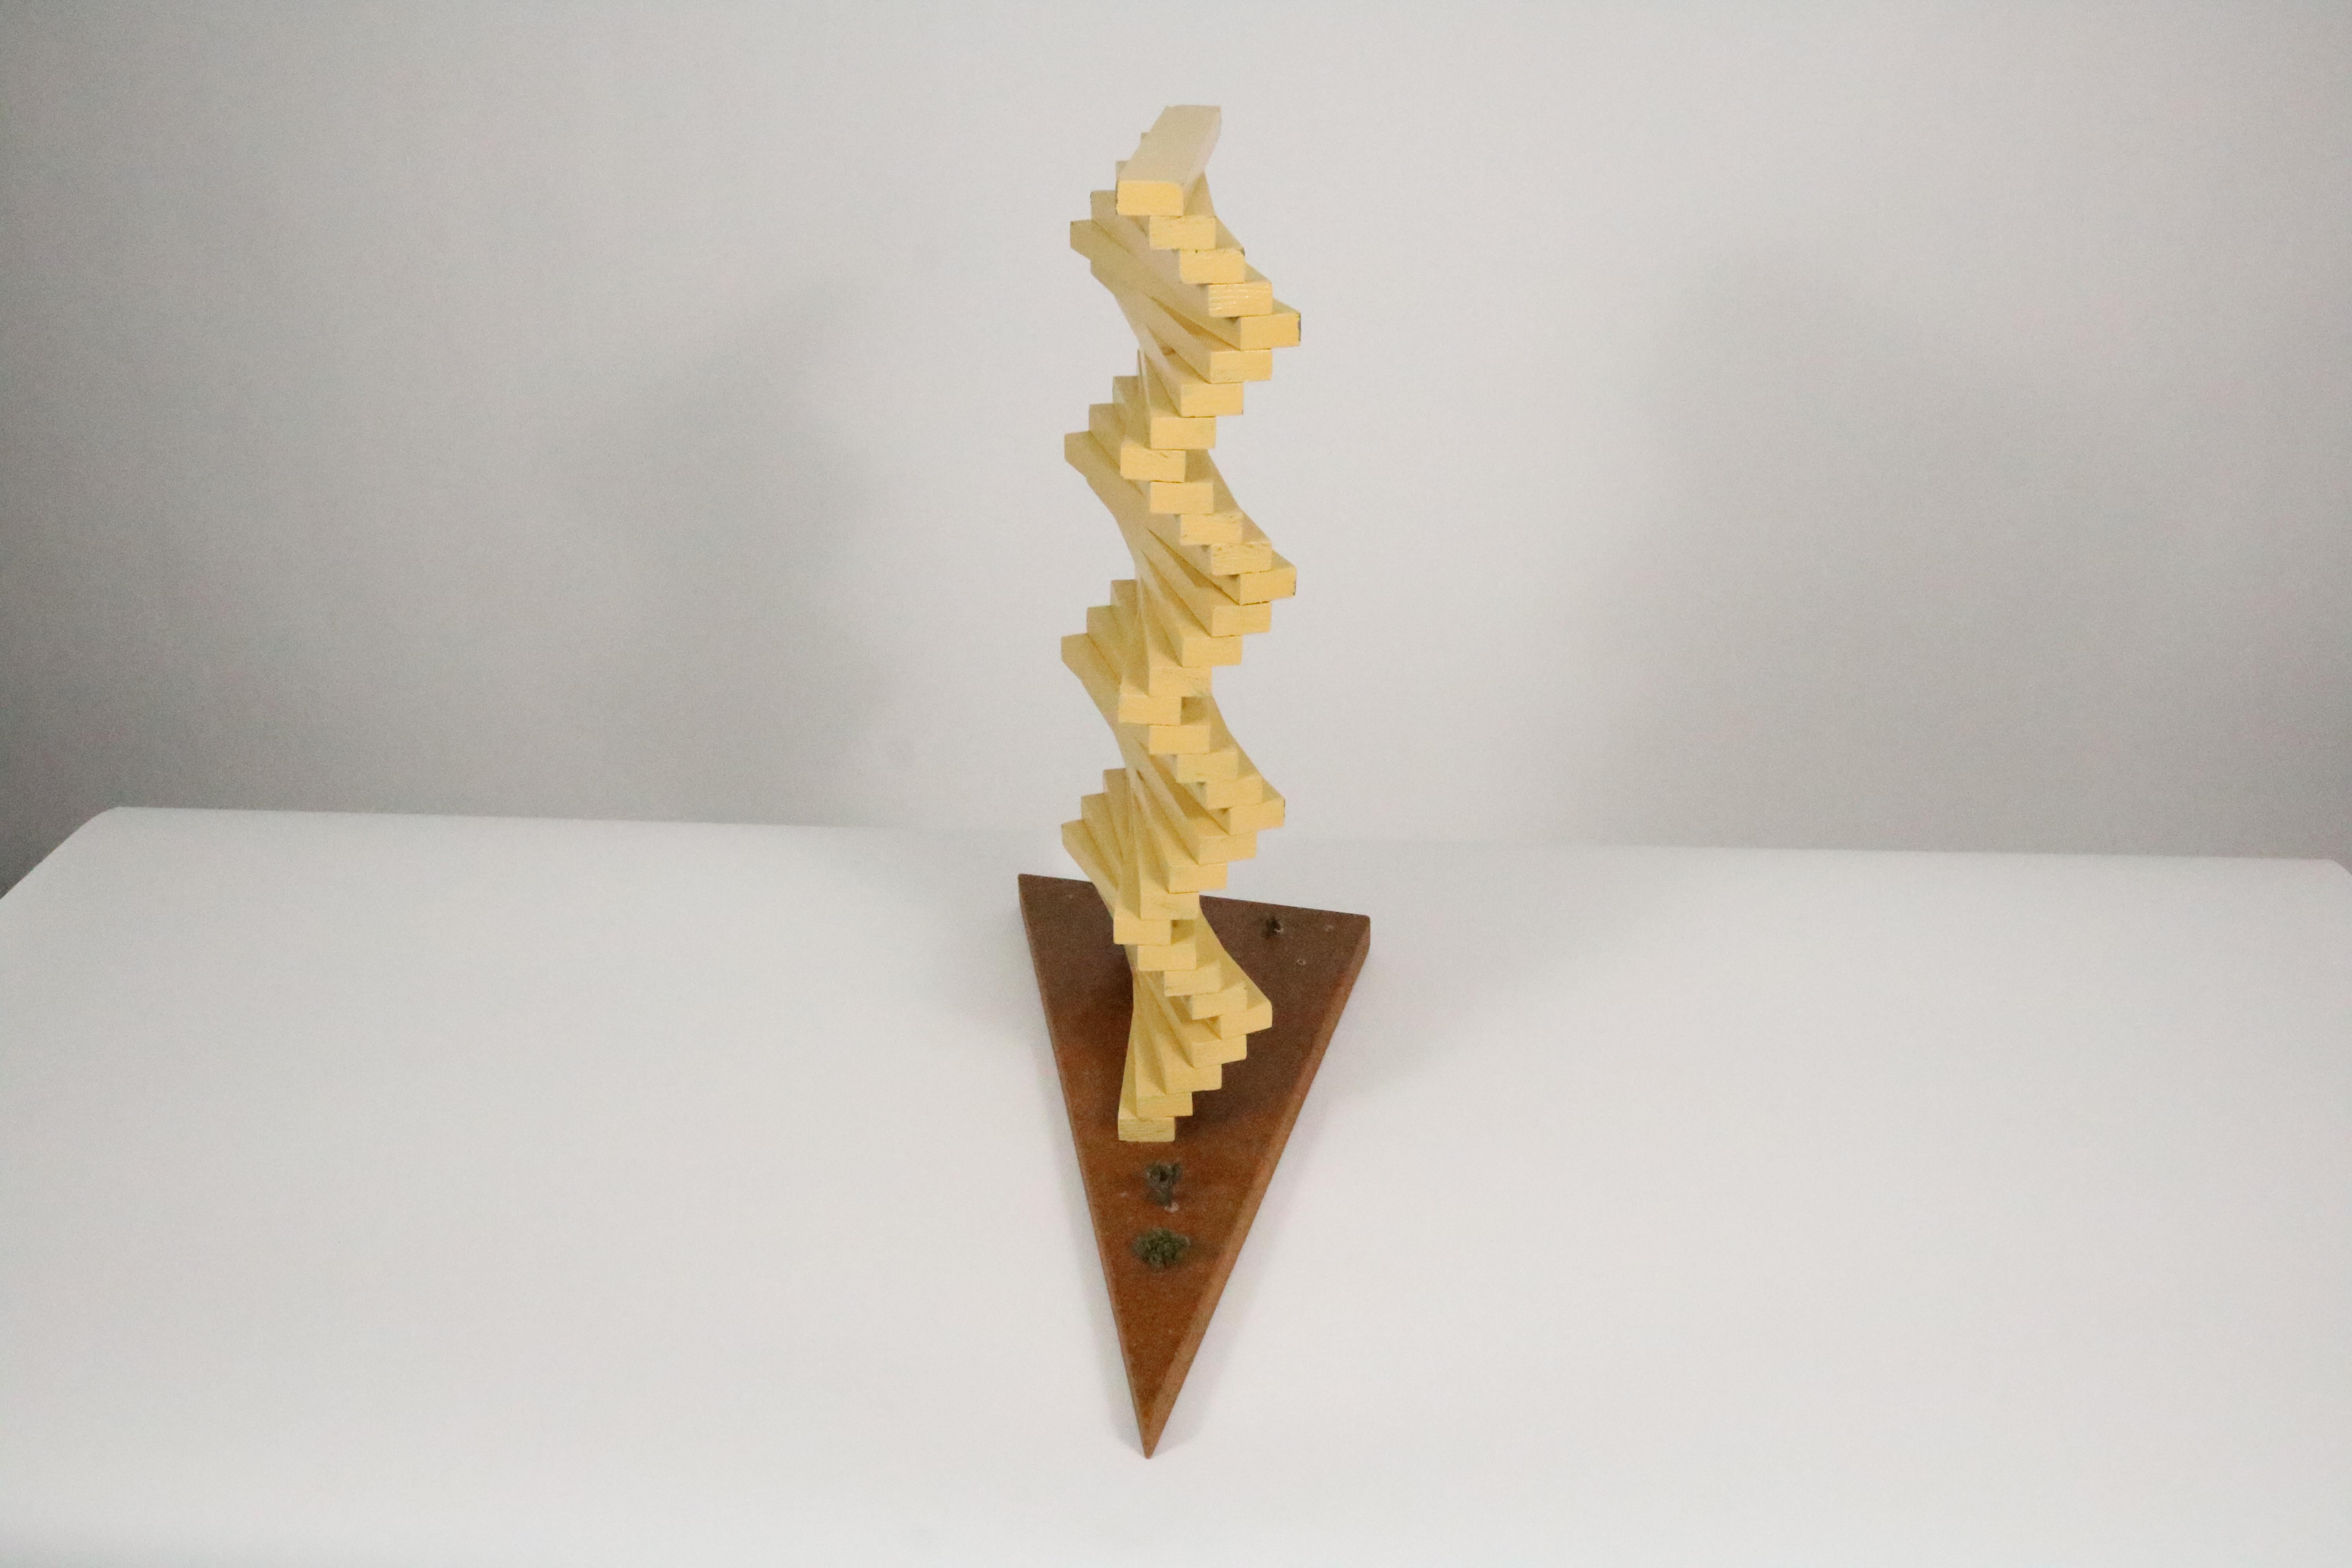 Artist's Maquette for the Articulated Wall Sculpture by Herbert Bayer 2